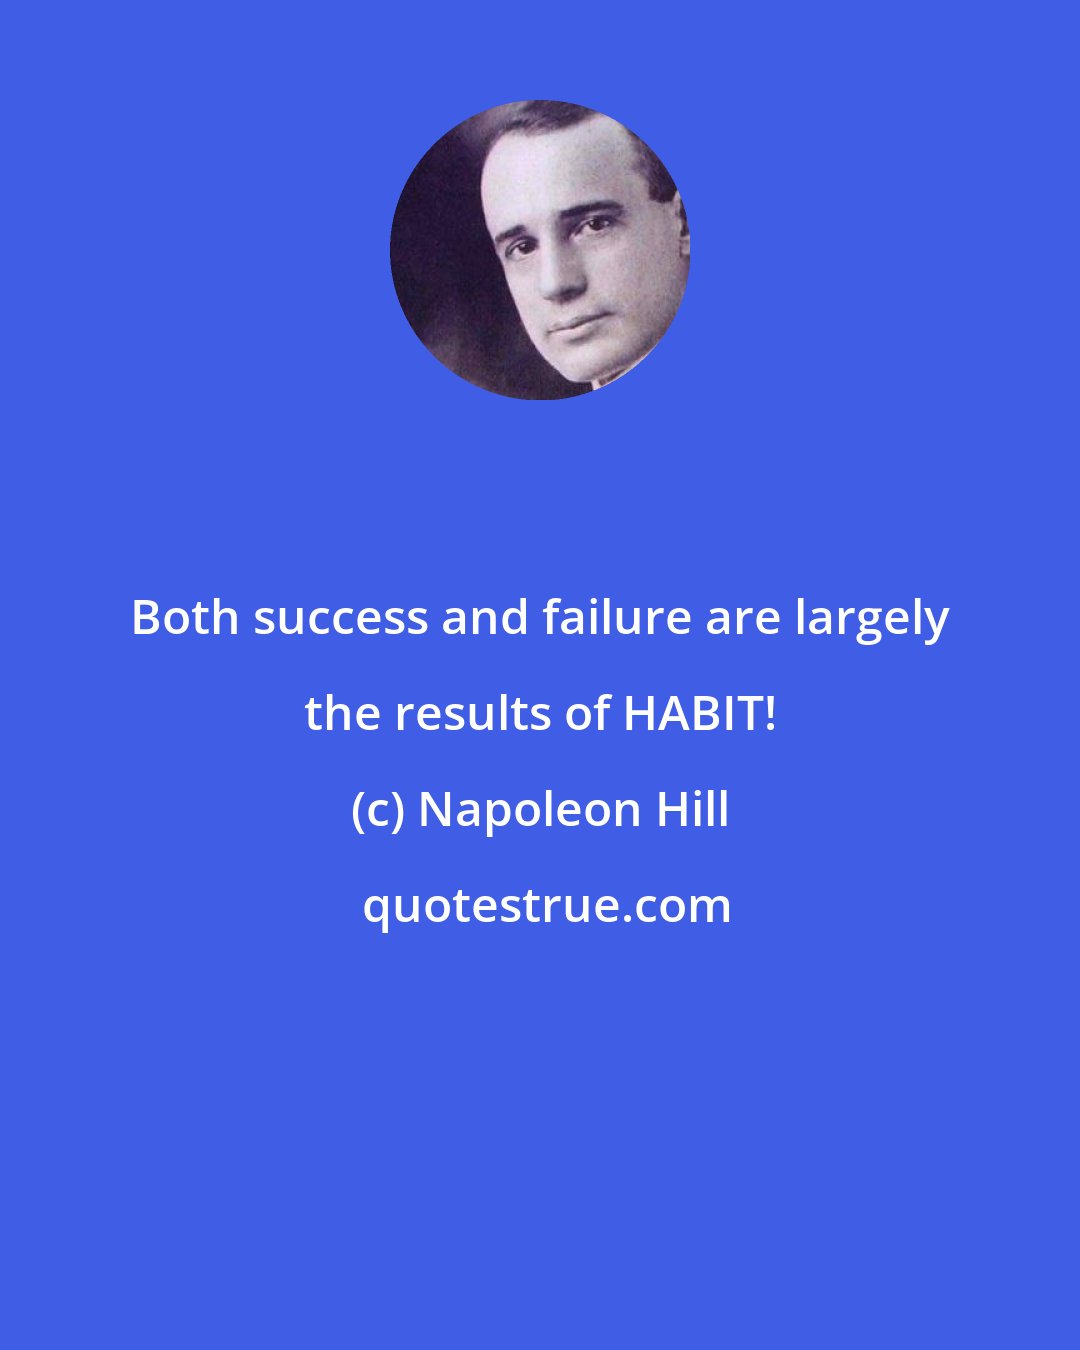 Napoleon Hill: Both success and failure are largely the results of HABIT!